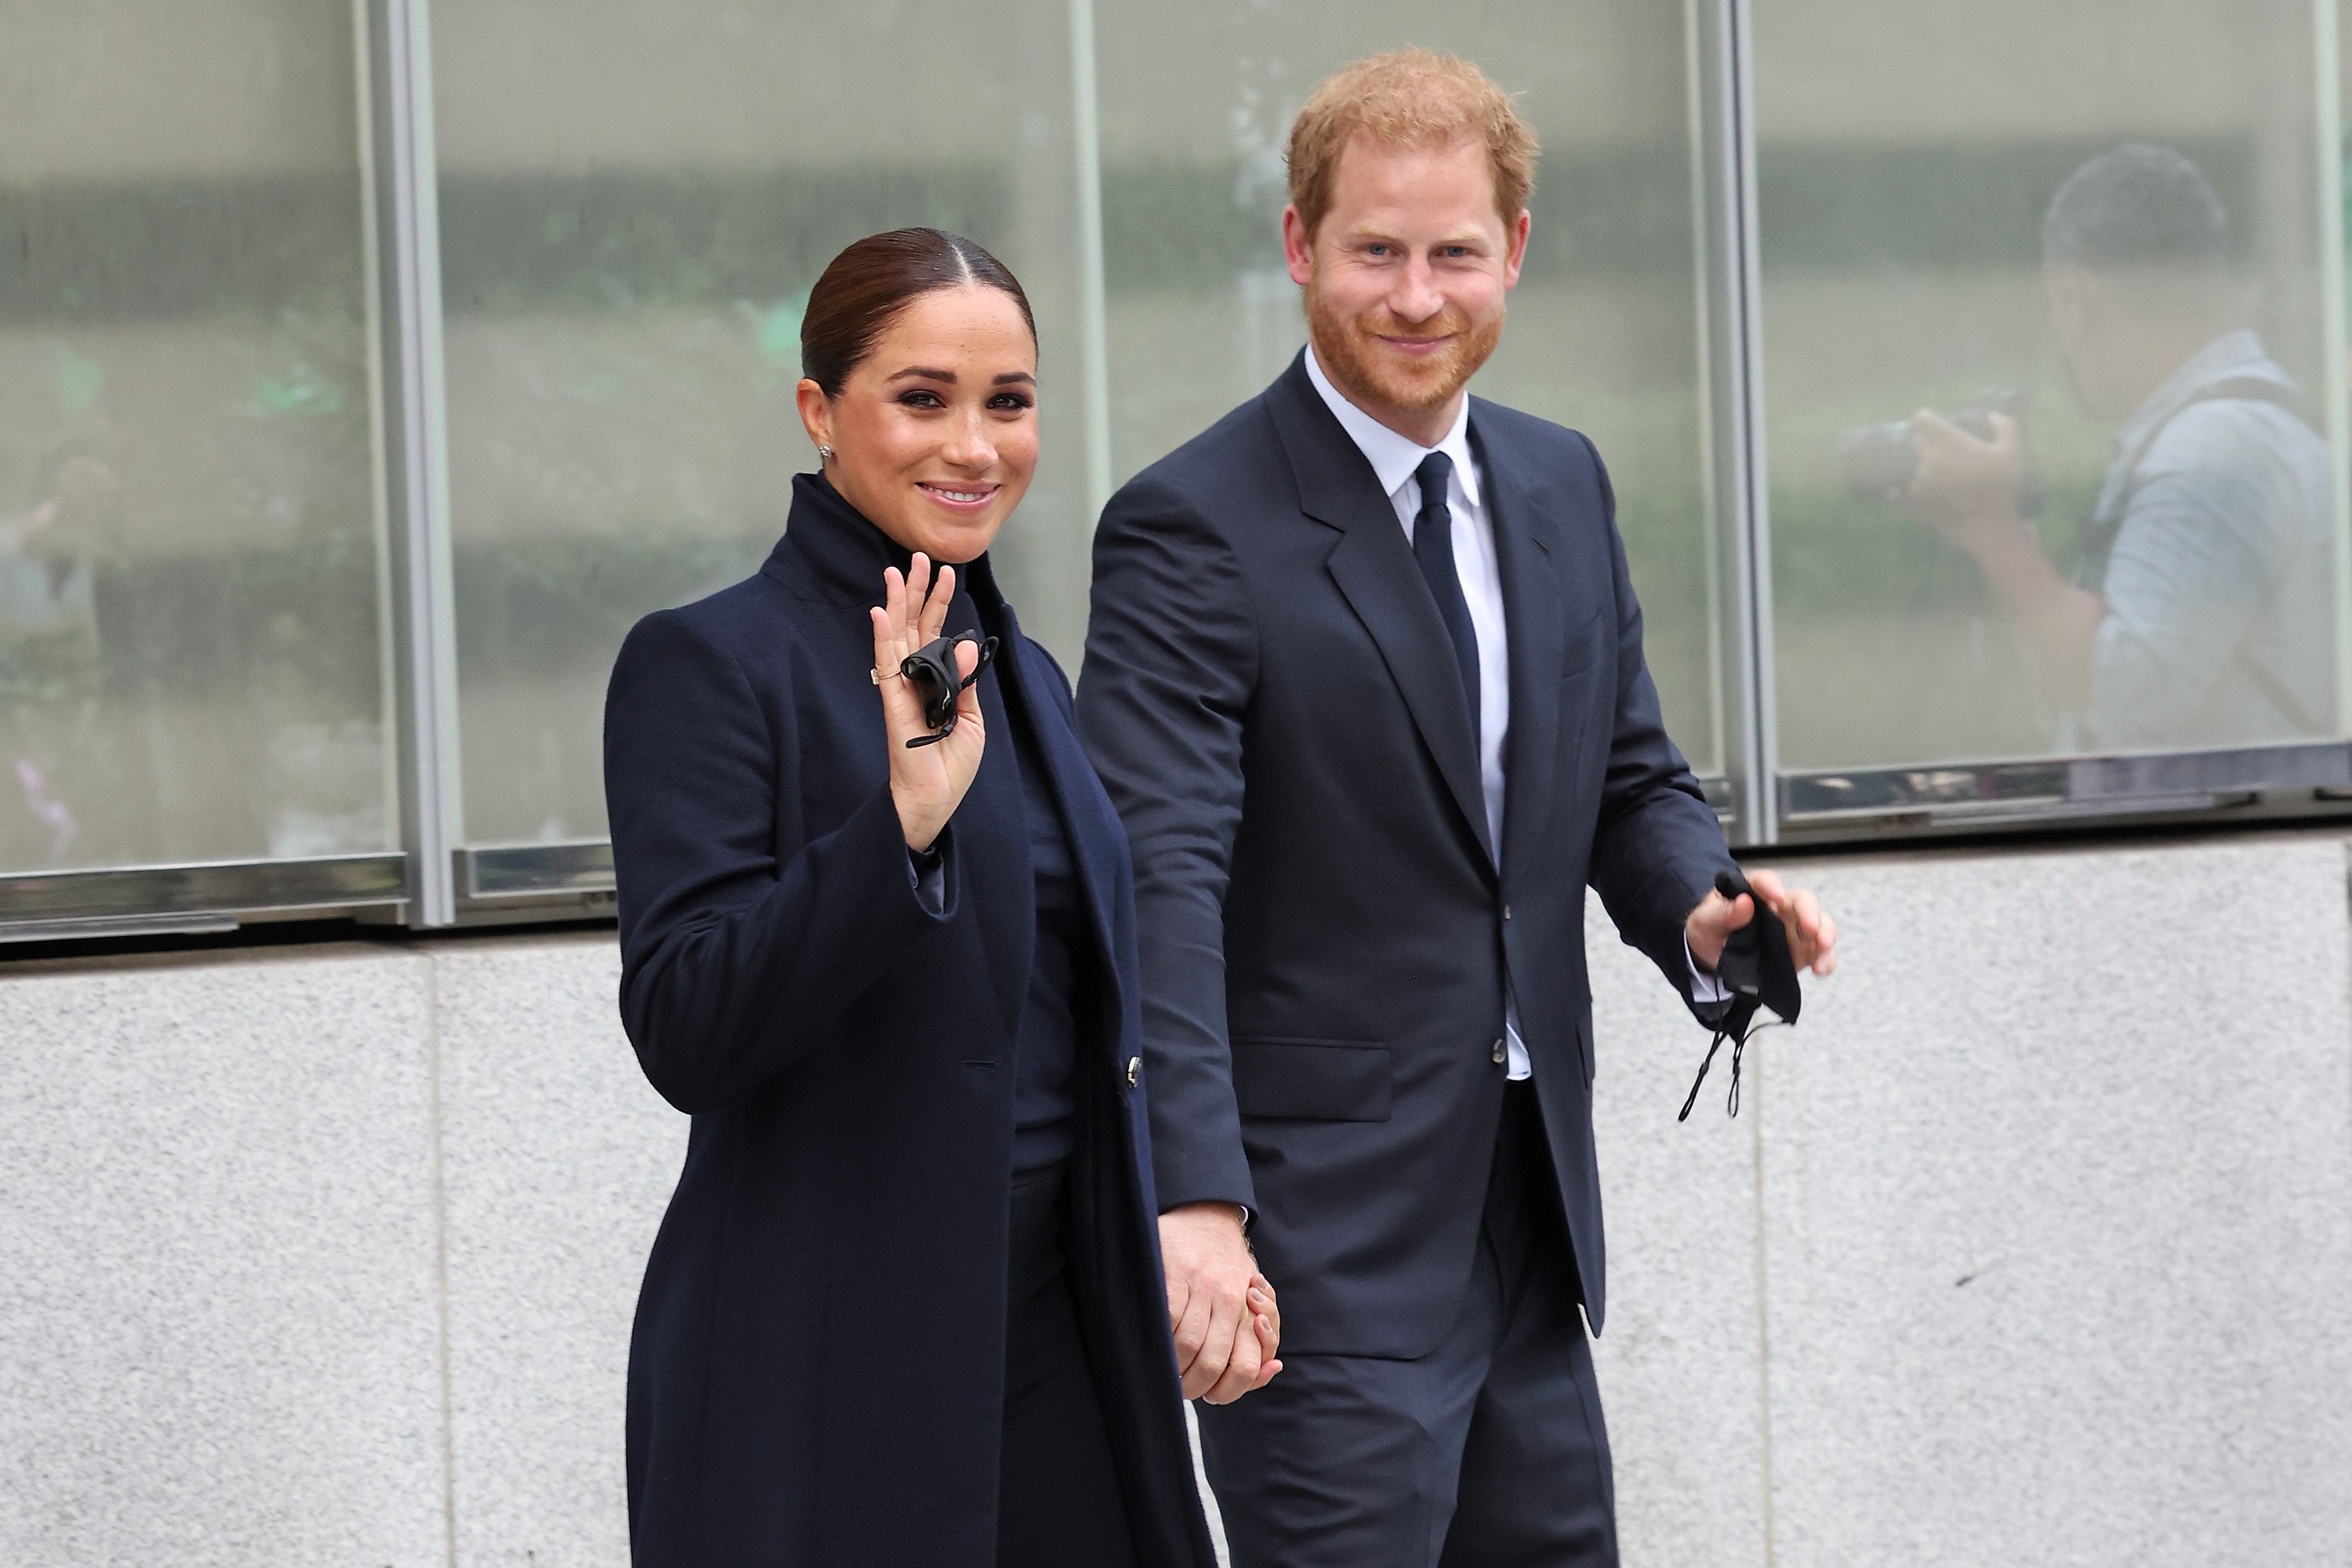 Prince Harry, Duke of Sussex, and Meghan, Duchess of Sussex, visit One World Observatory on September 23, 2021 in New York City. | Source: Getty Images